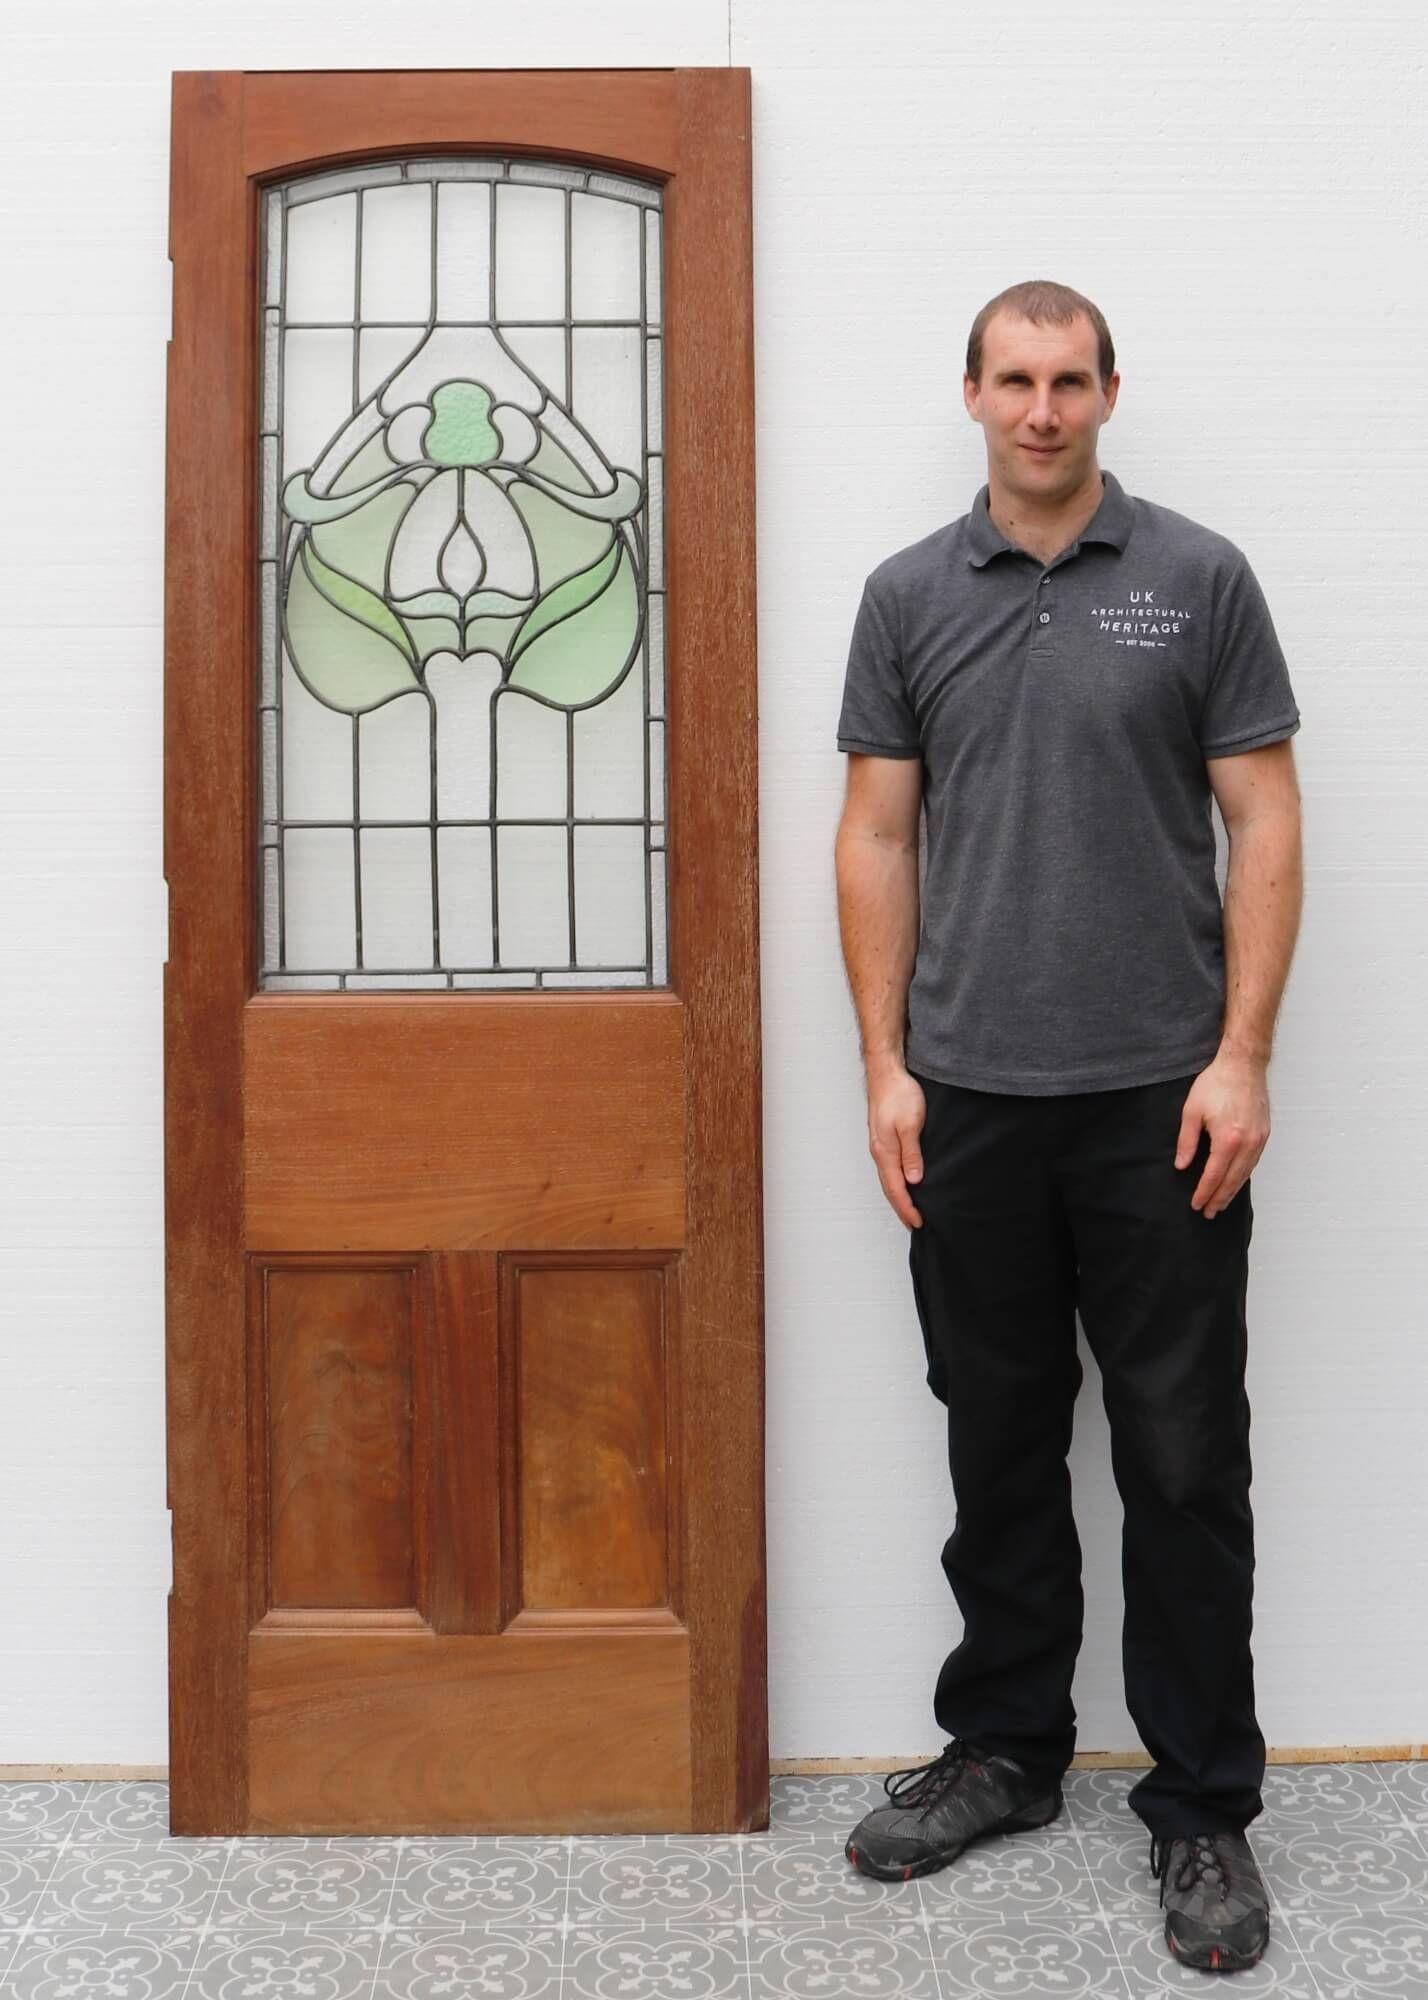 You can imagine this Victorian internal door with stained glass situated in a period kitchen or in the entrance hall of a traditional Victorian townhouse. This mahogany door is over 140 years old, dating from the late 1800s. It is fitted with fully